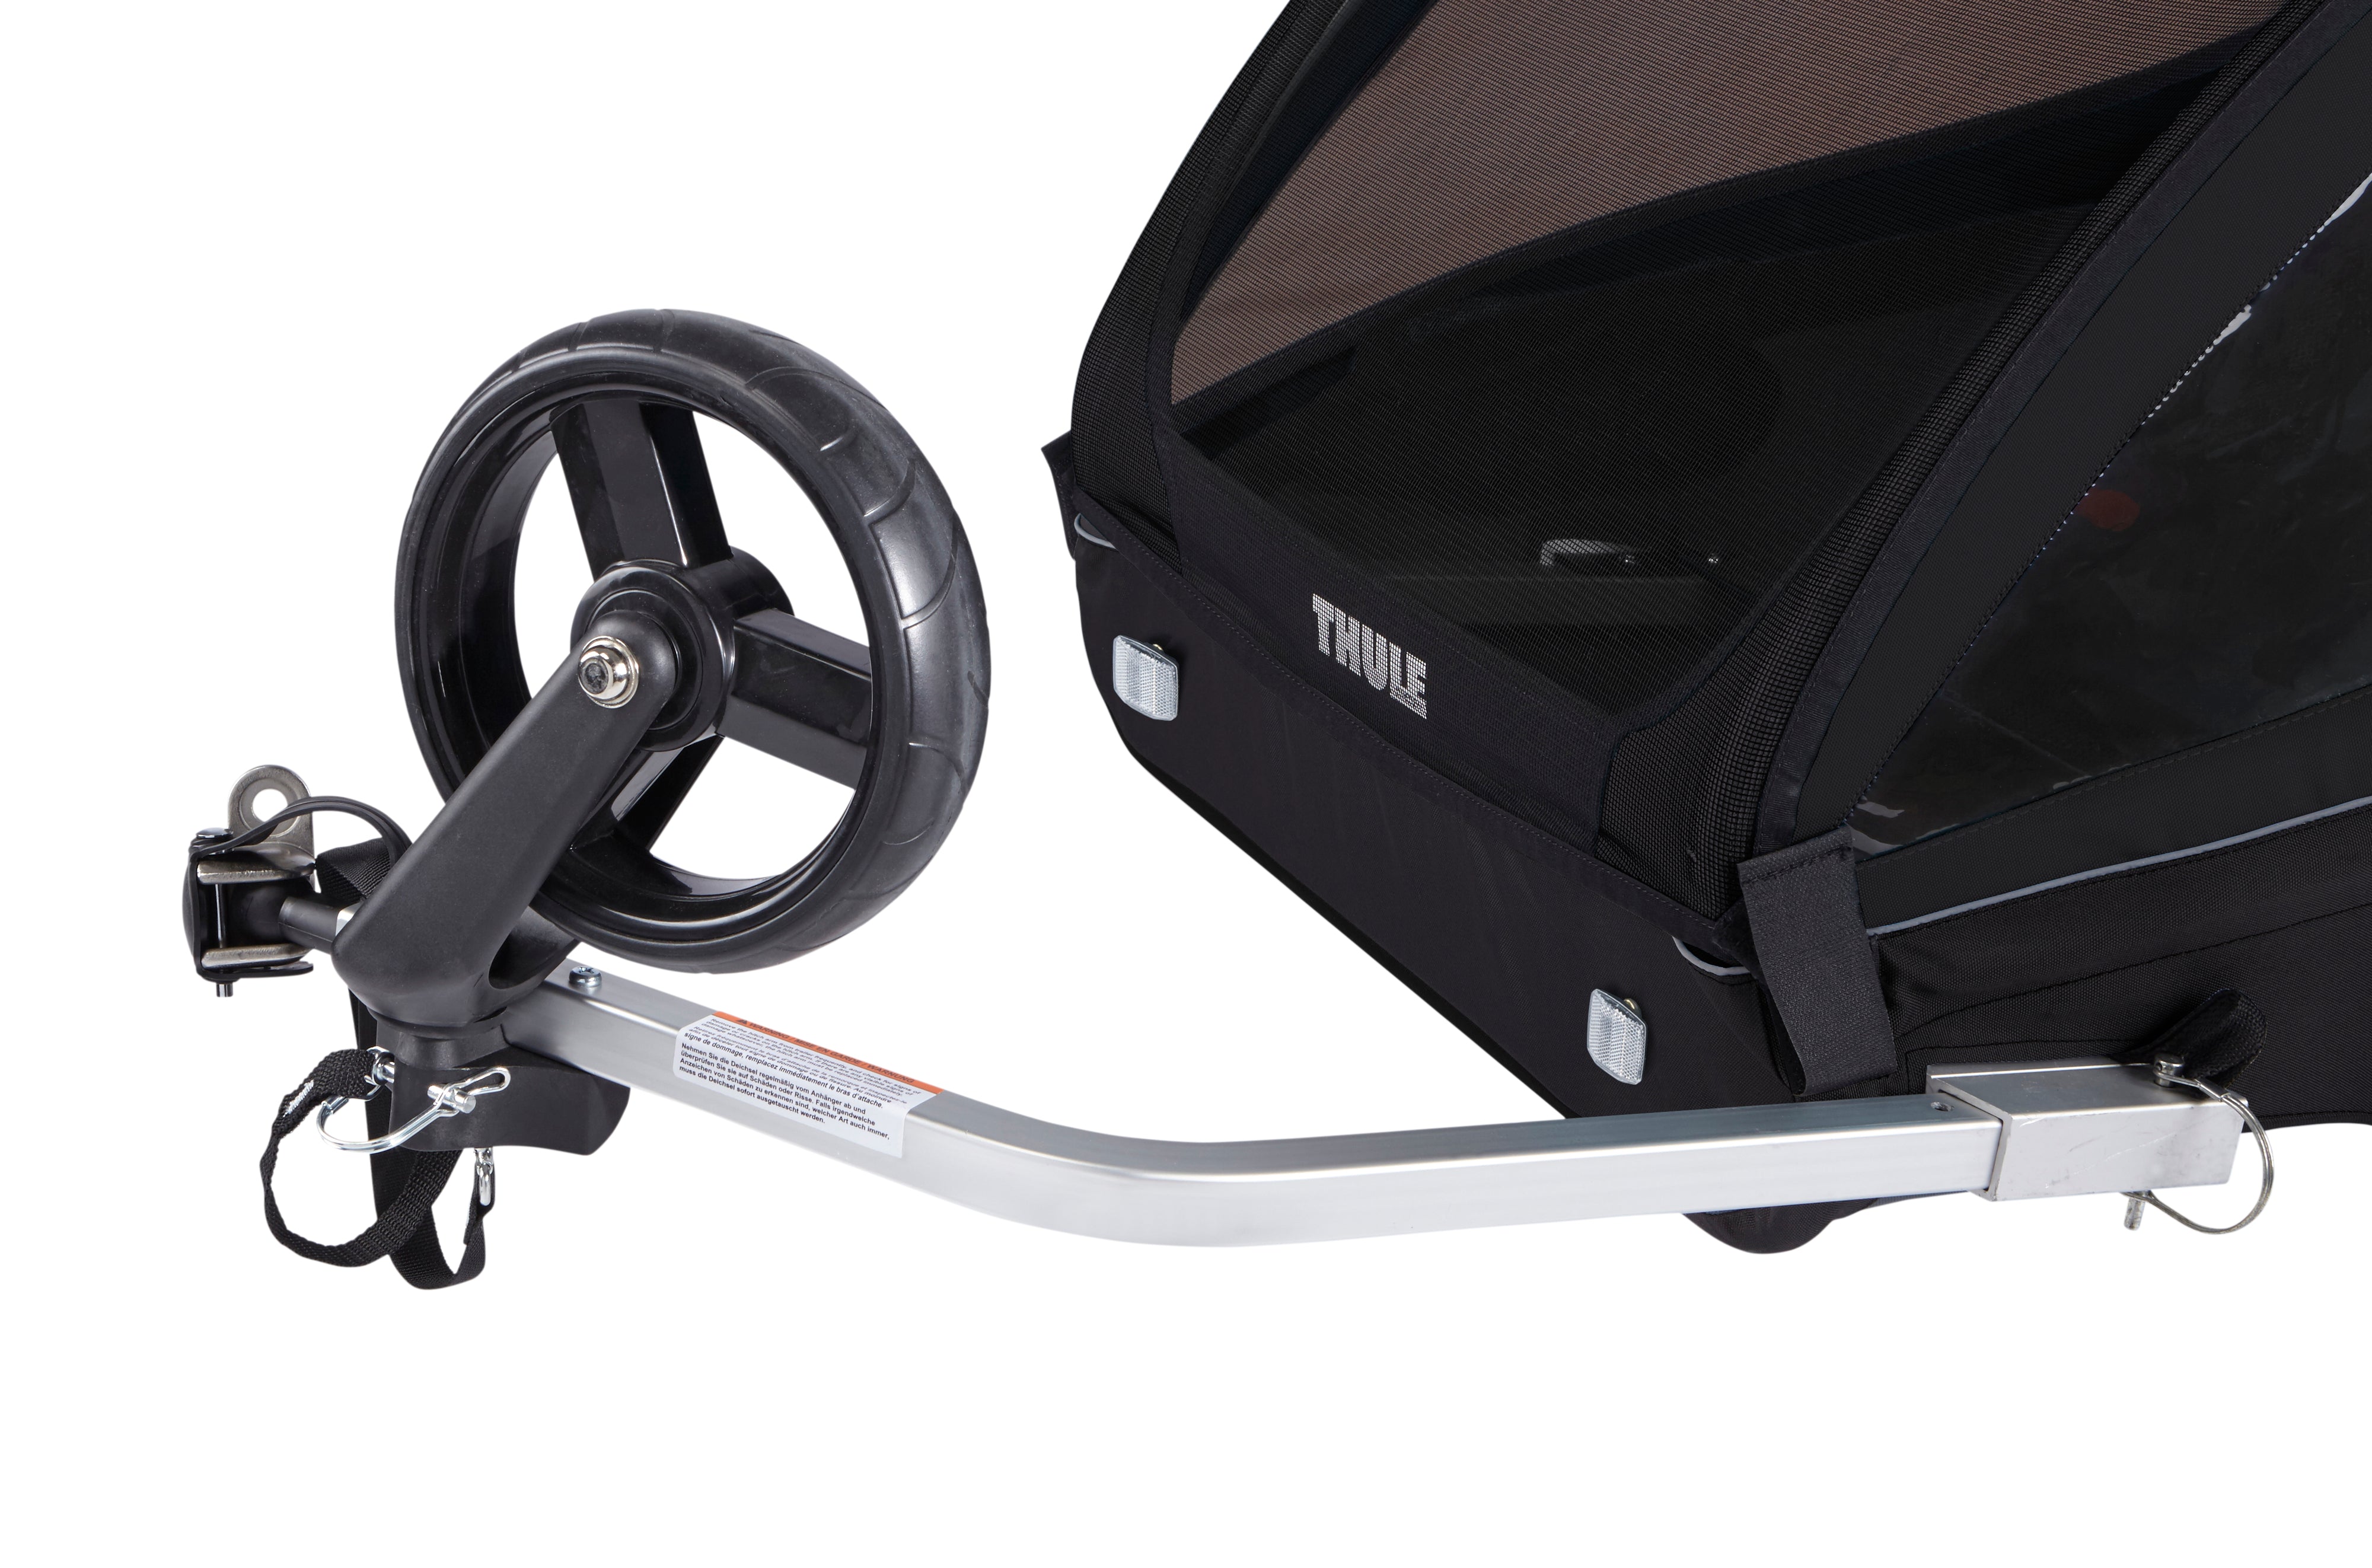 Thule bike trailer coaster XT close up of attachement of bike trailer to bicycle